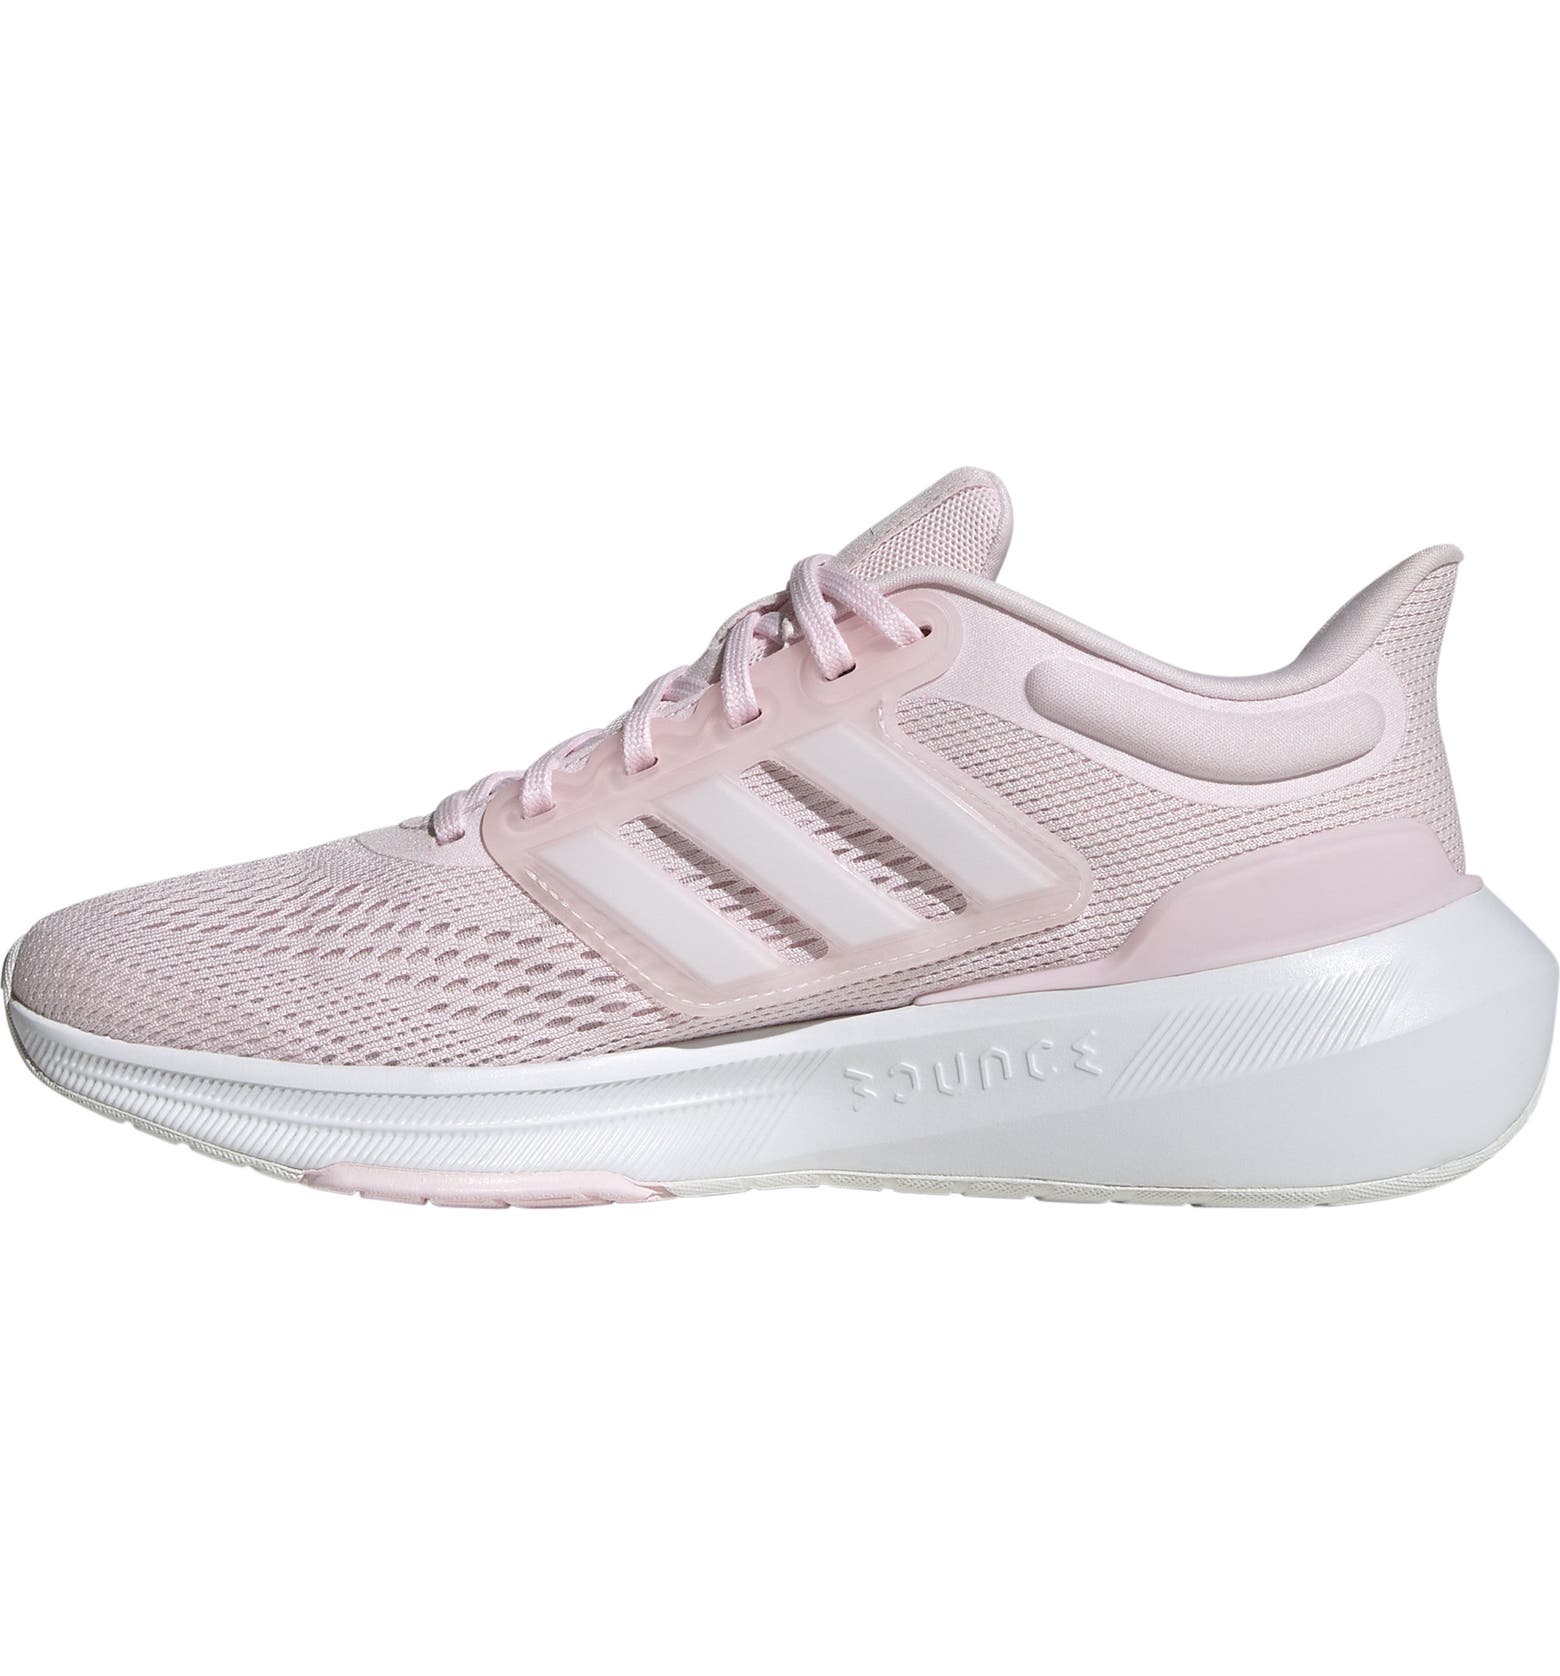 adidas EQ23 Run Athletic Sneaker - Wide Width Available (Women ...